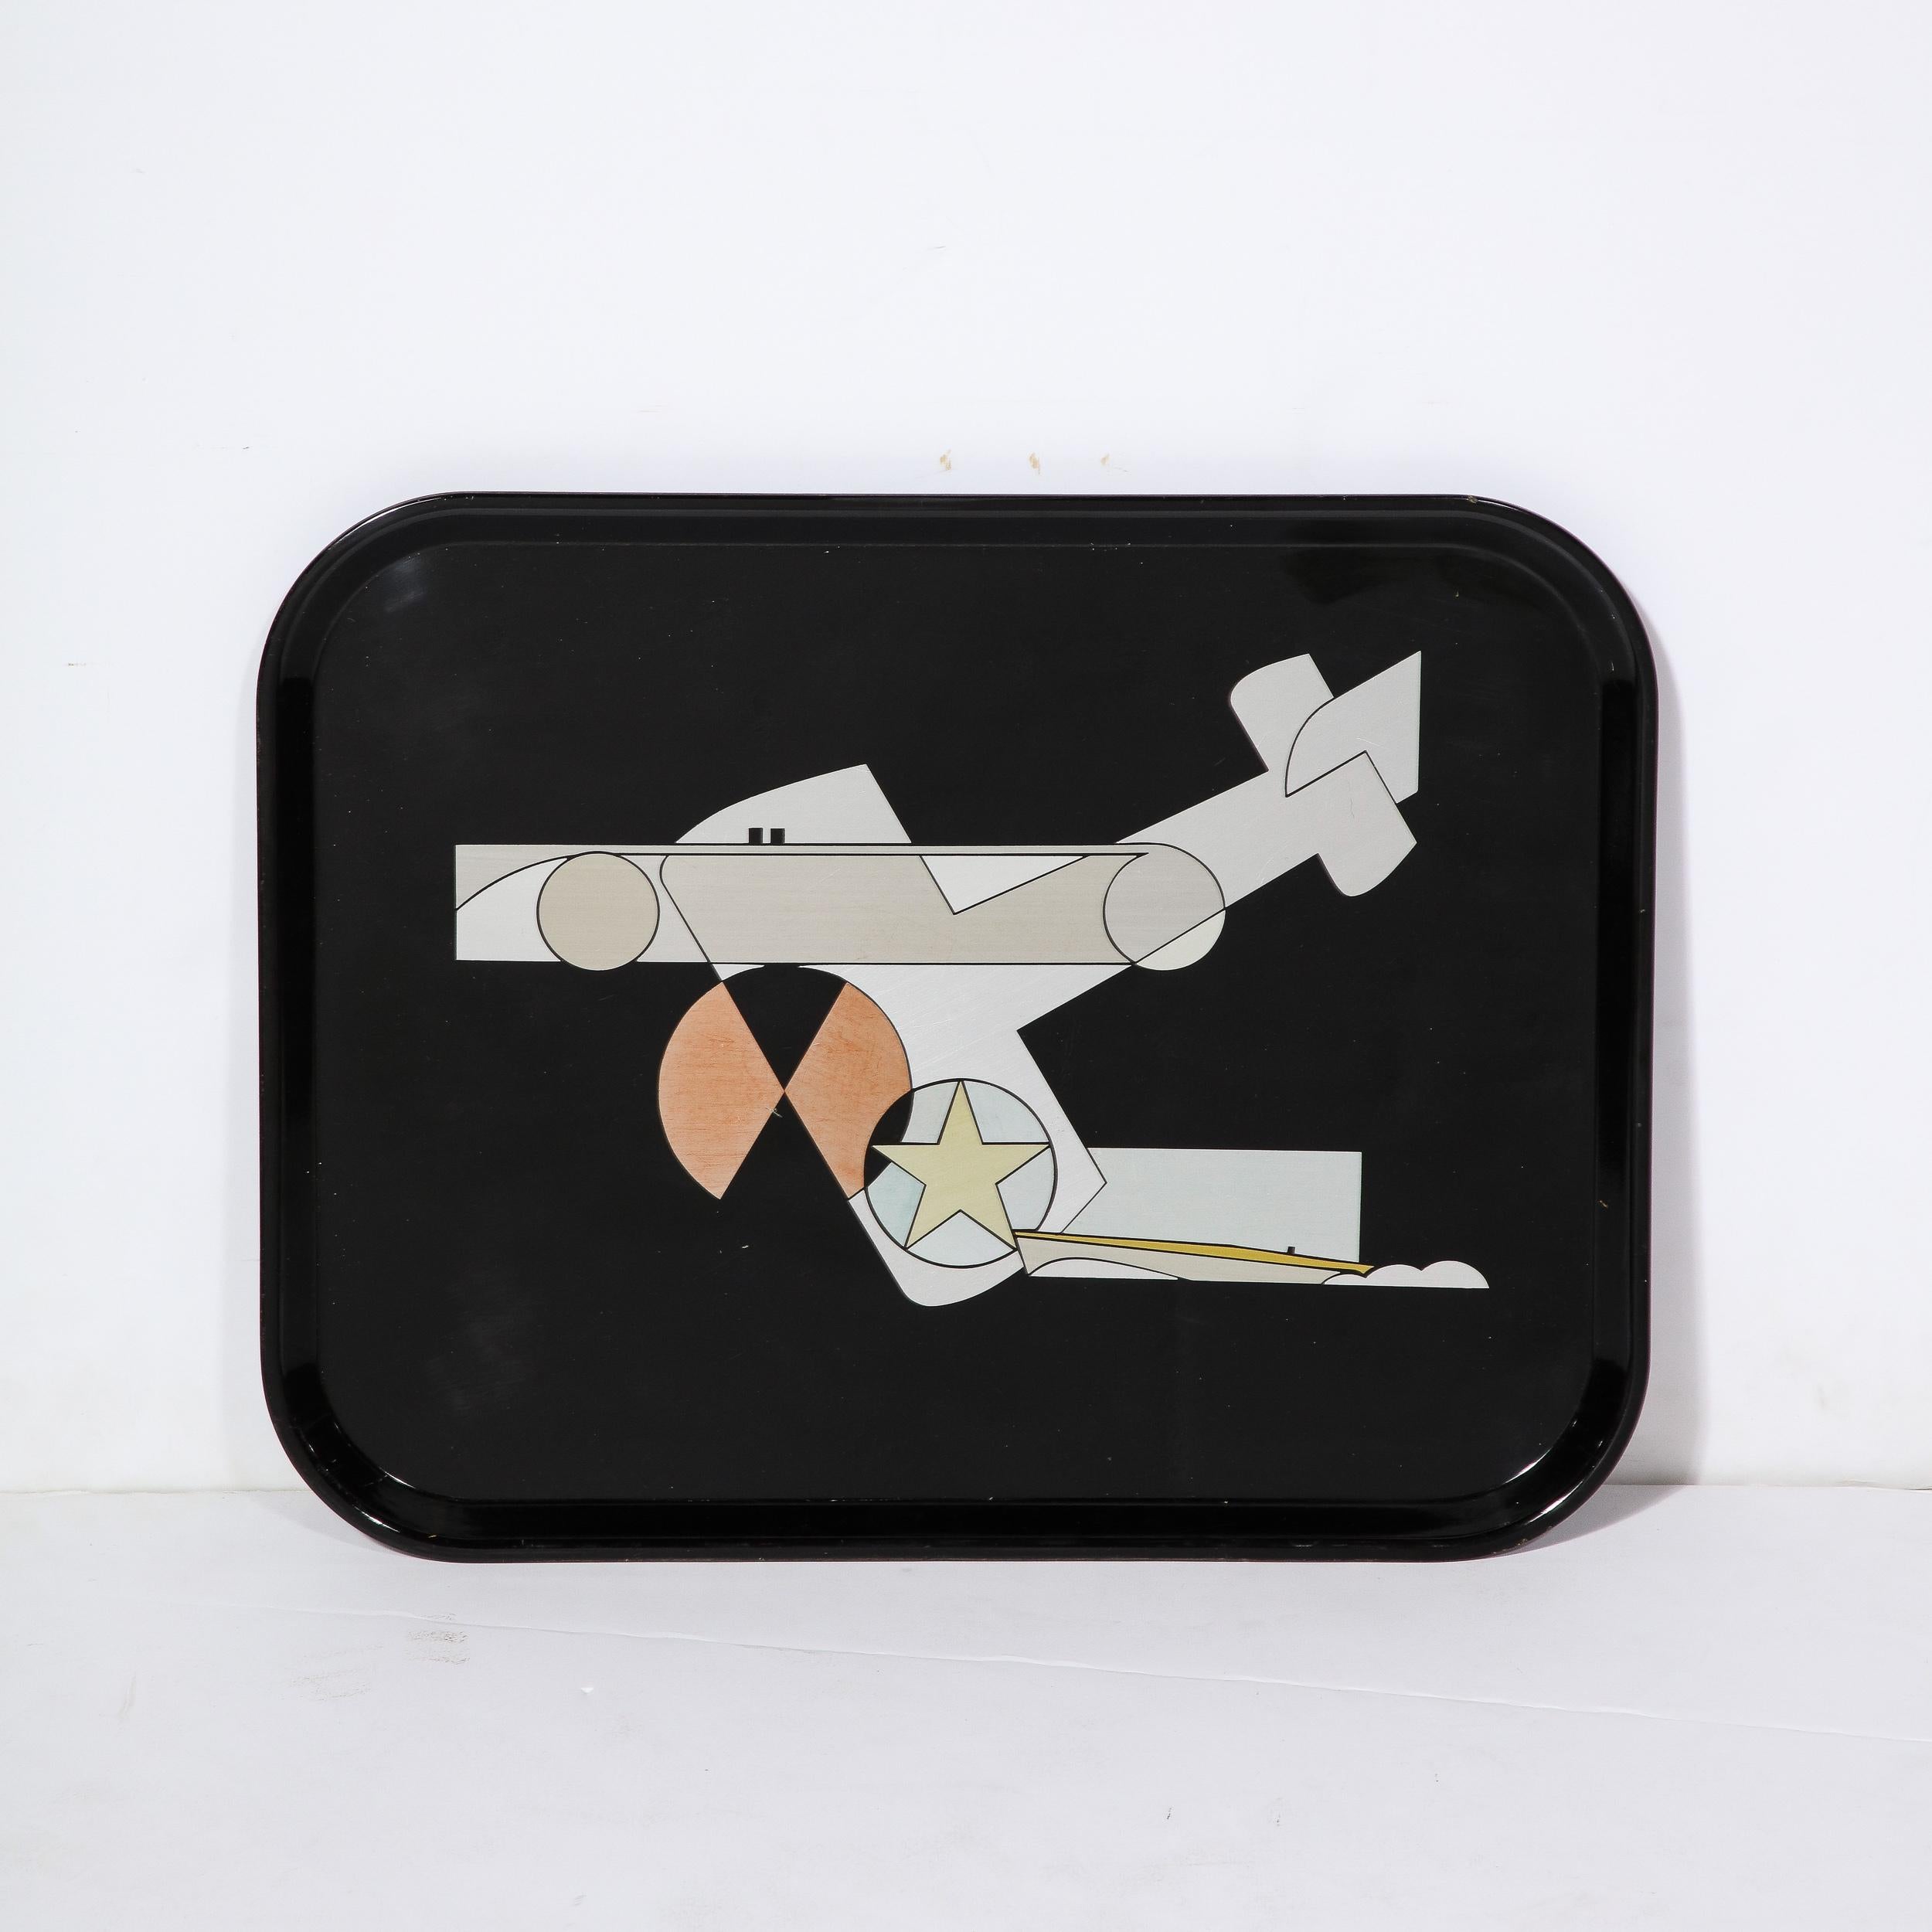 This serving tray is a pre-war icon and design masterpiece, designed by George Switzer (1890-1955) for Westinghouse in 1932. Bearing a geometric image of three staples of industrial machinery (a racing car, speed boat, and biplane plane), this